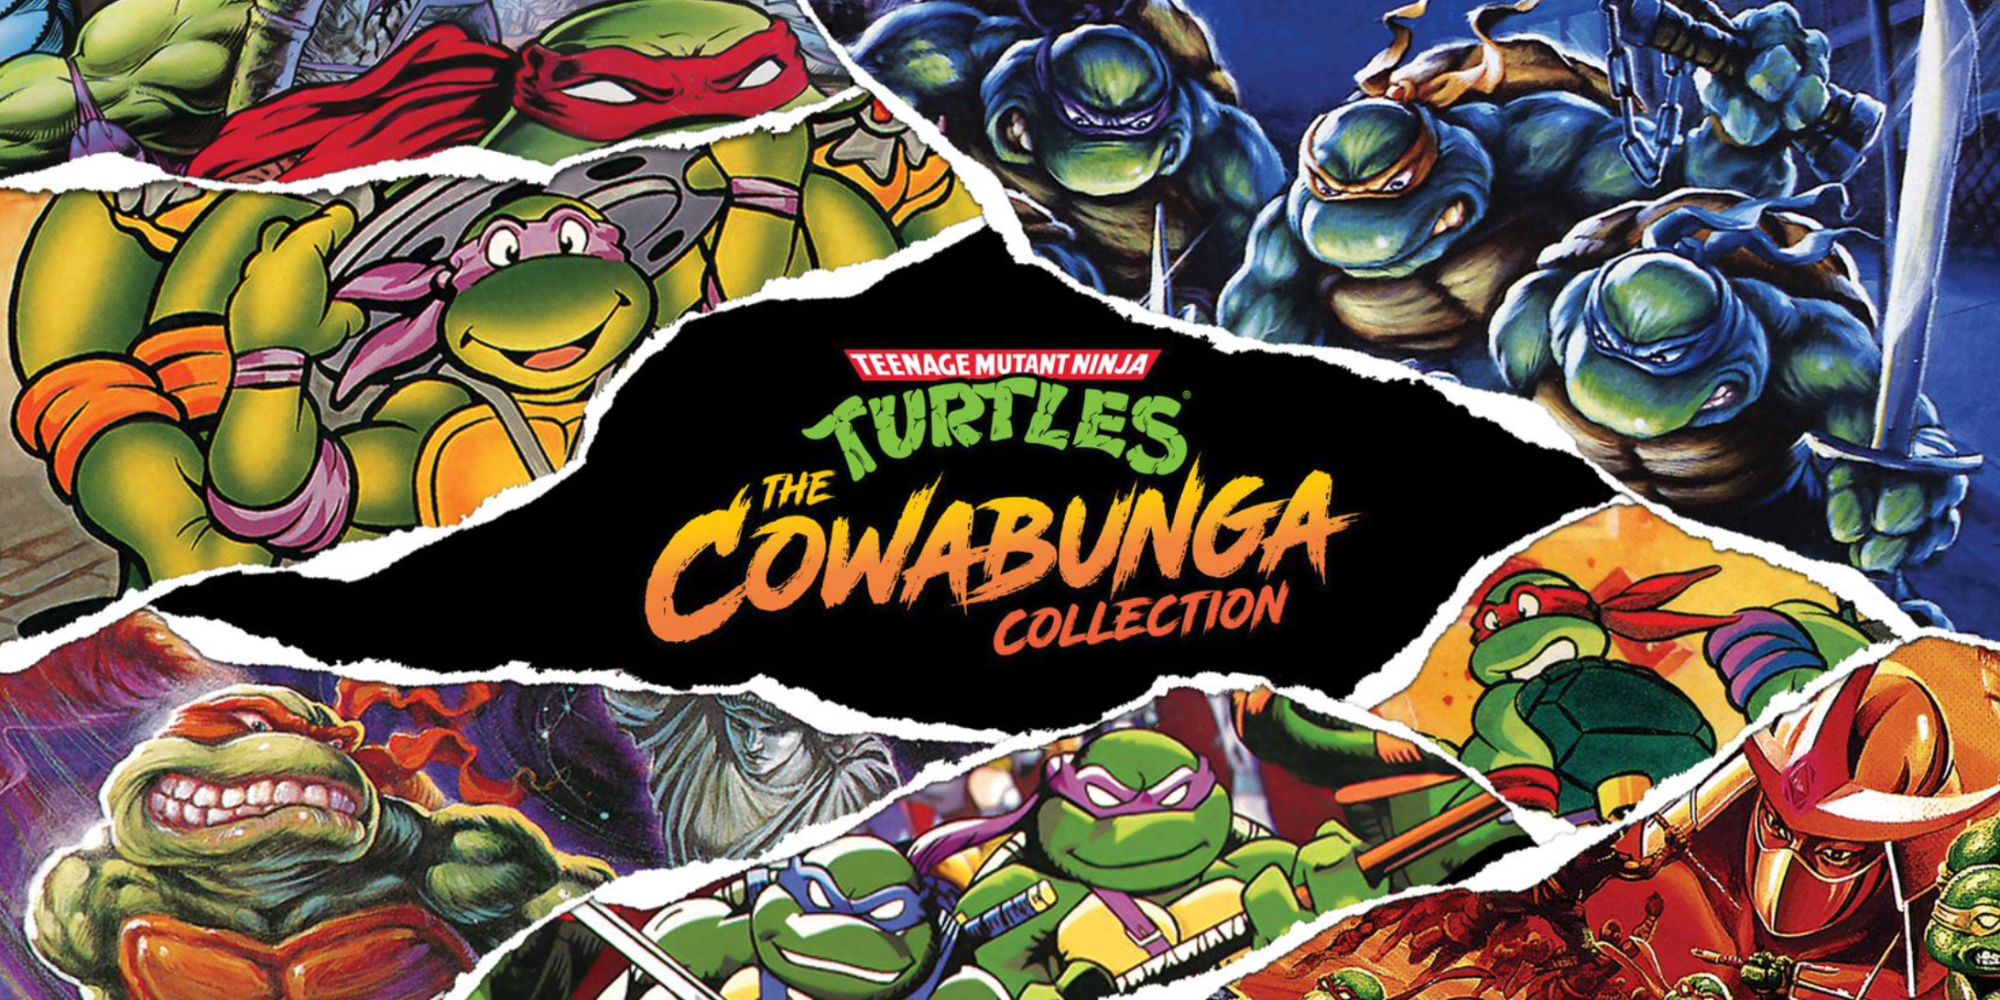 Every TMNT game that will be included in Konami's Teenage Mutant Ninja Turtles: The Cowabunga Collection